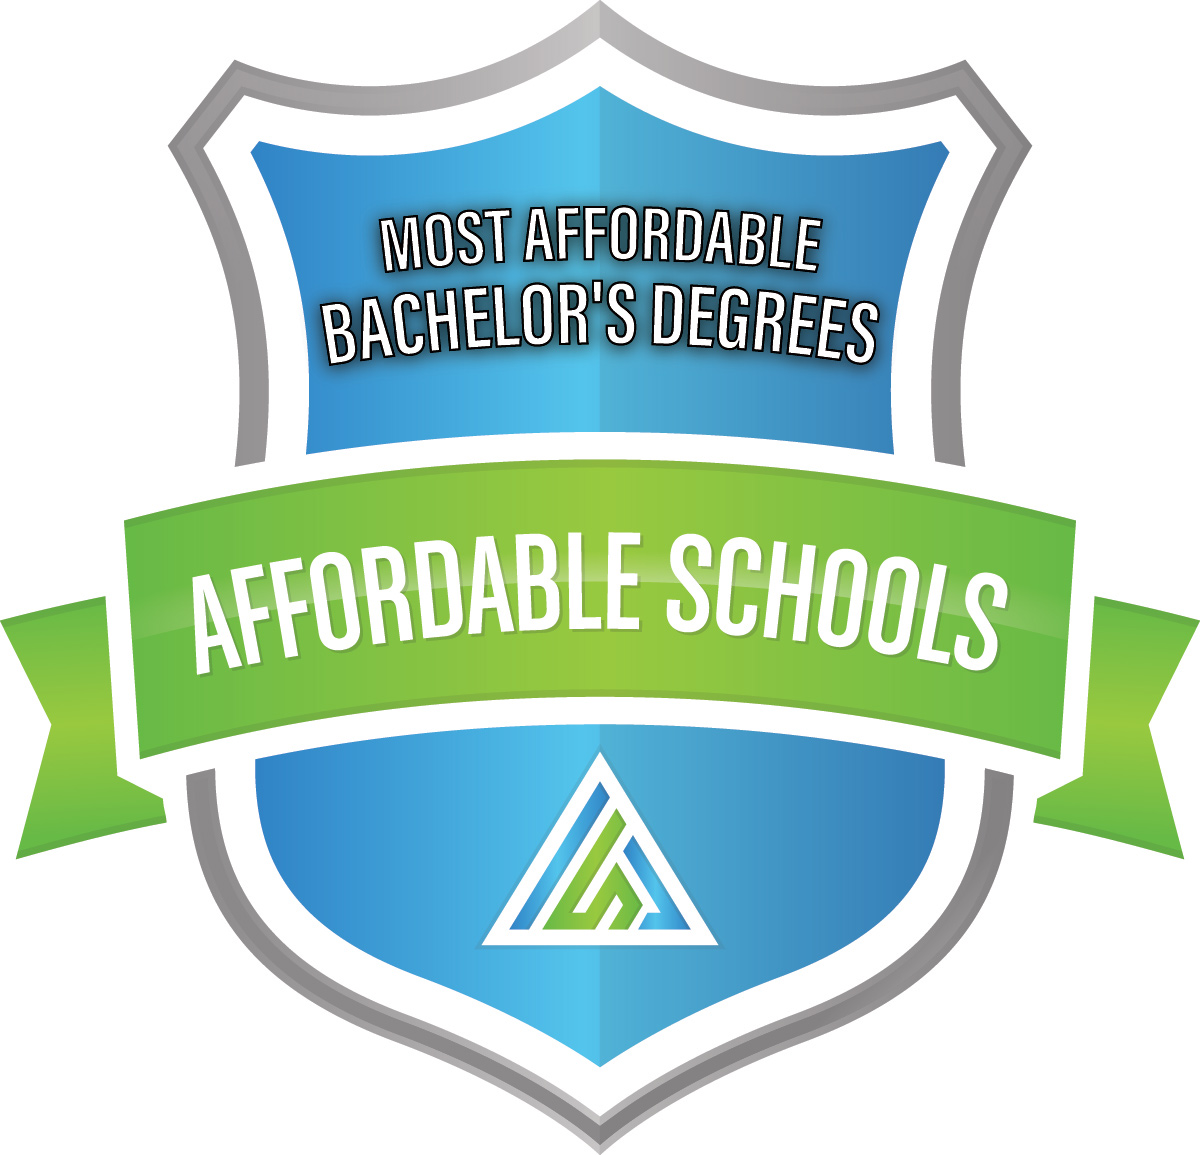 Most Affordable Bachelor's Degrees - Affordable Schools